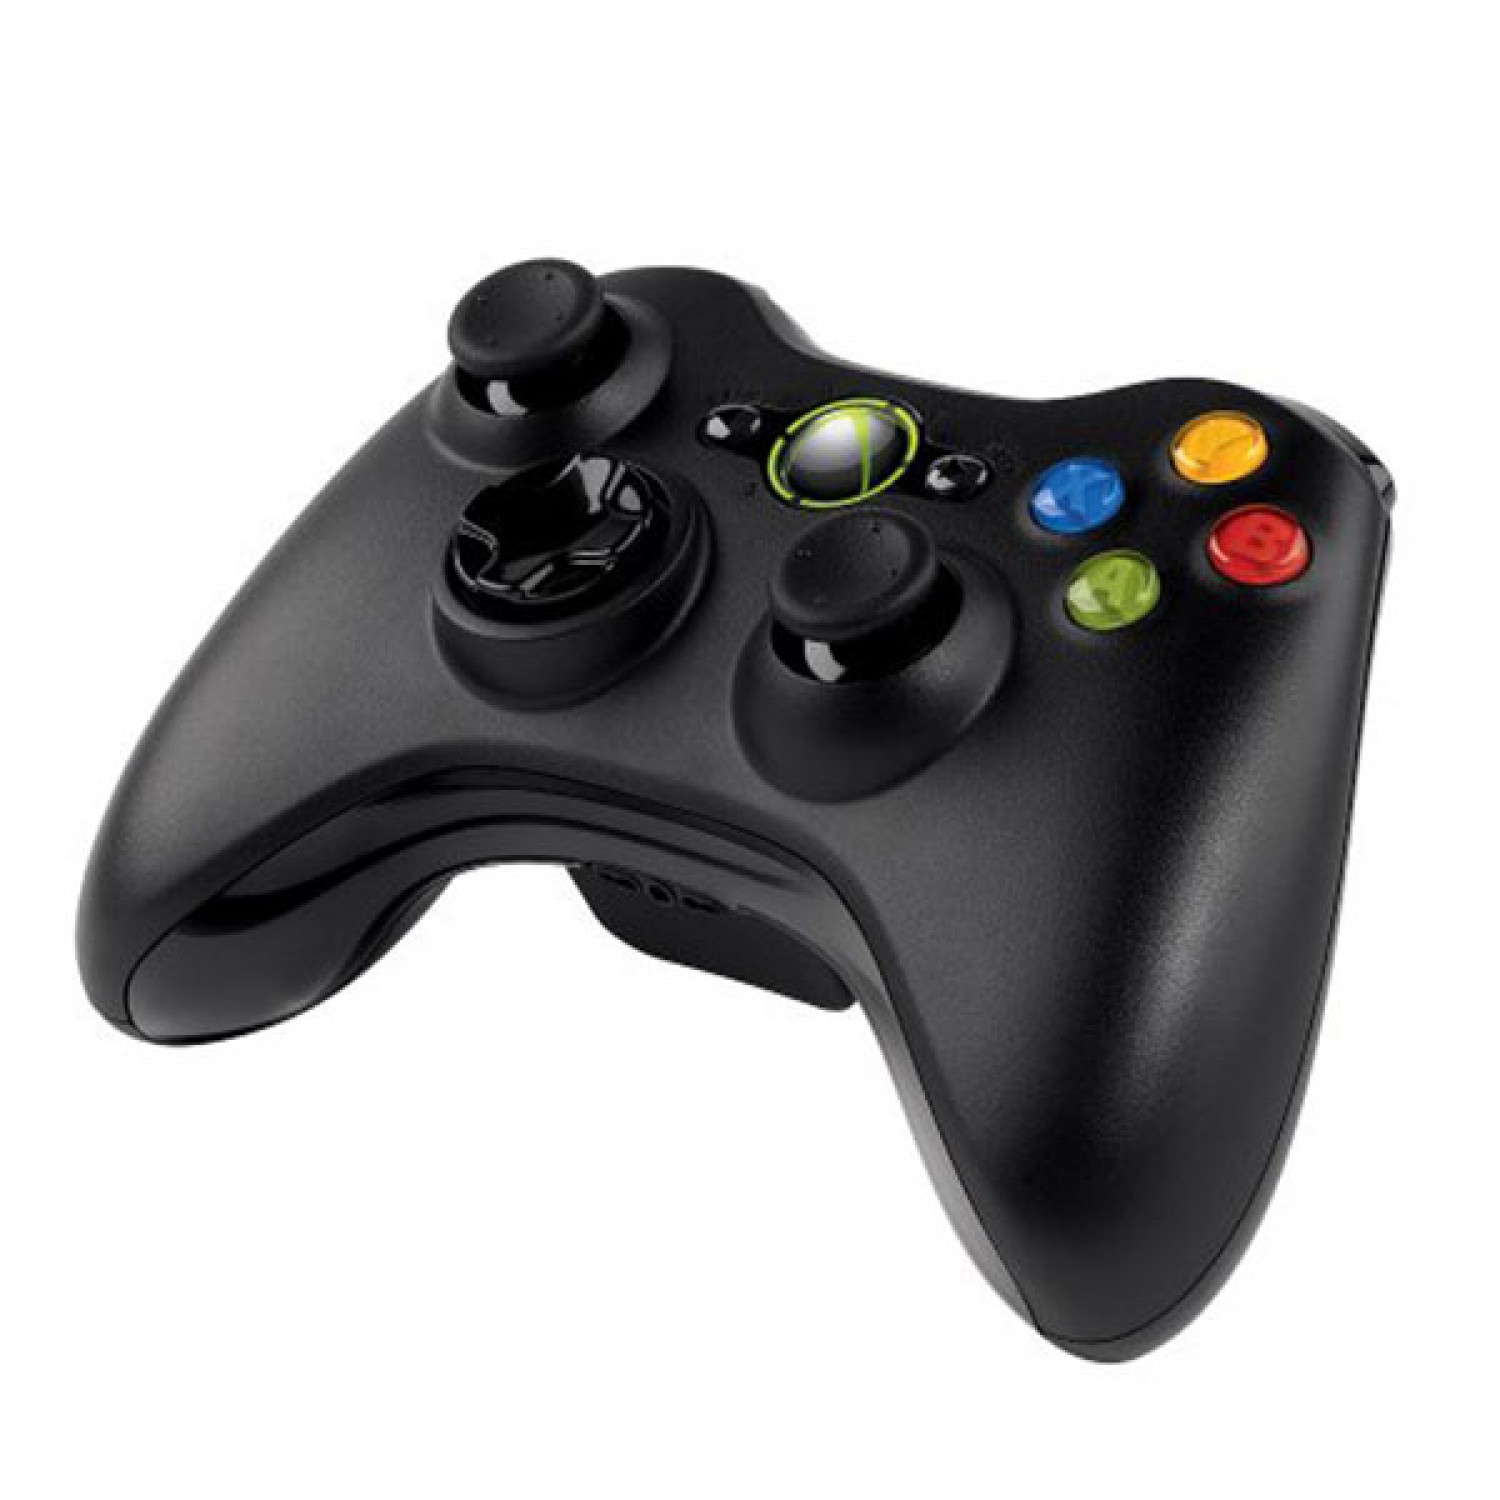  Xbox 360 for Windows Wireless Game pad 